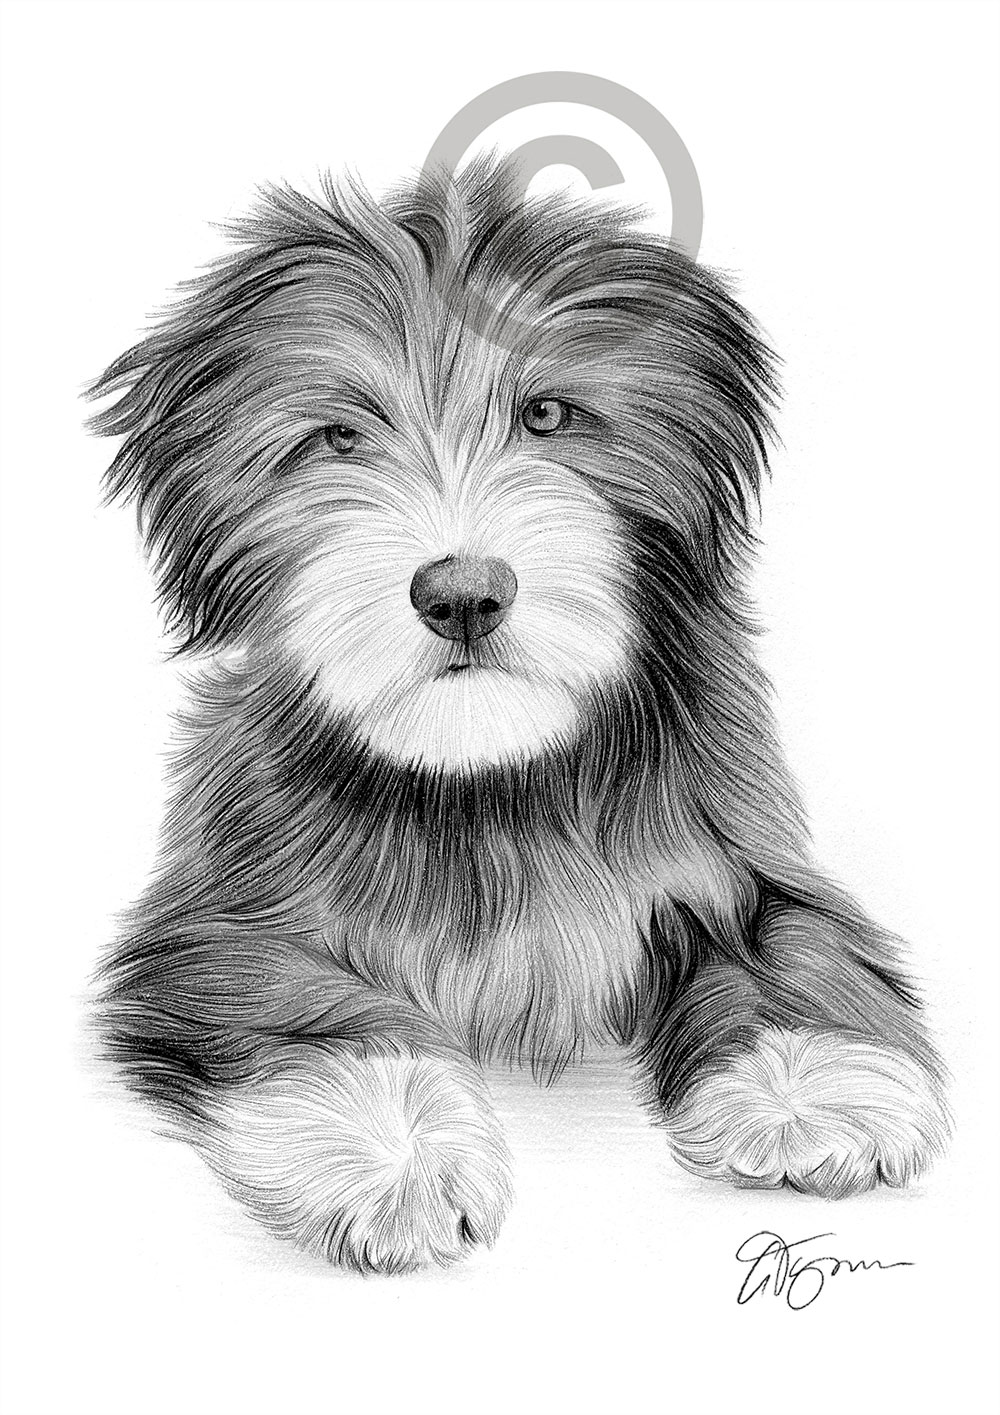 Pencil drawing of a Bearded Collie puppy by artist Gary Tymon